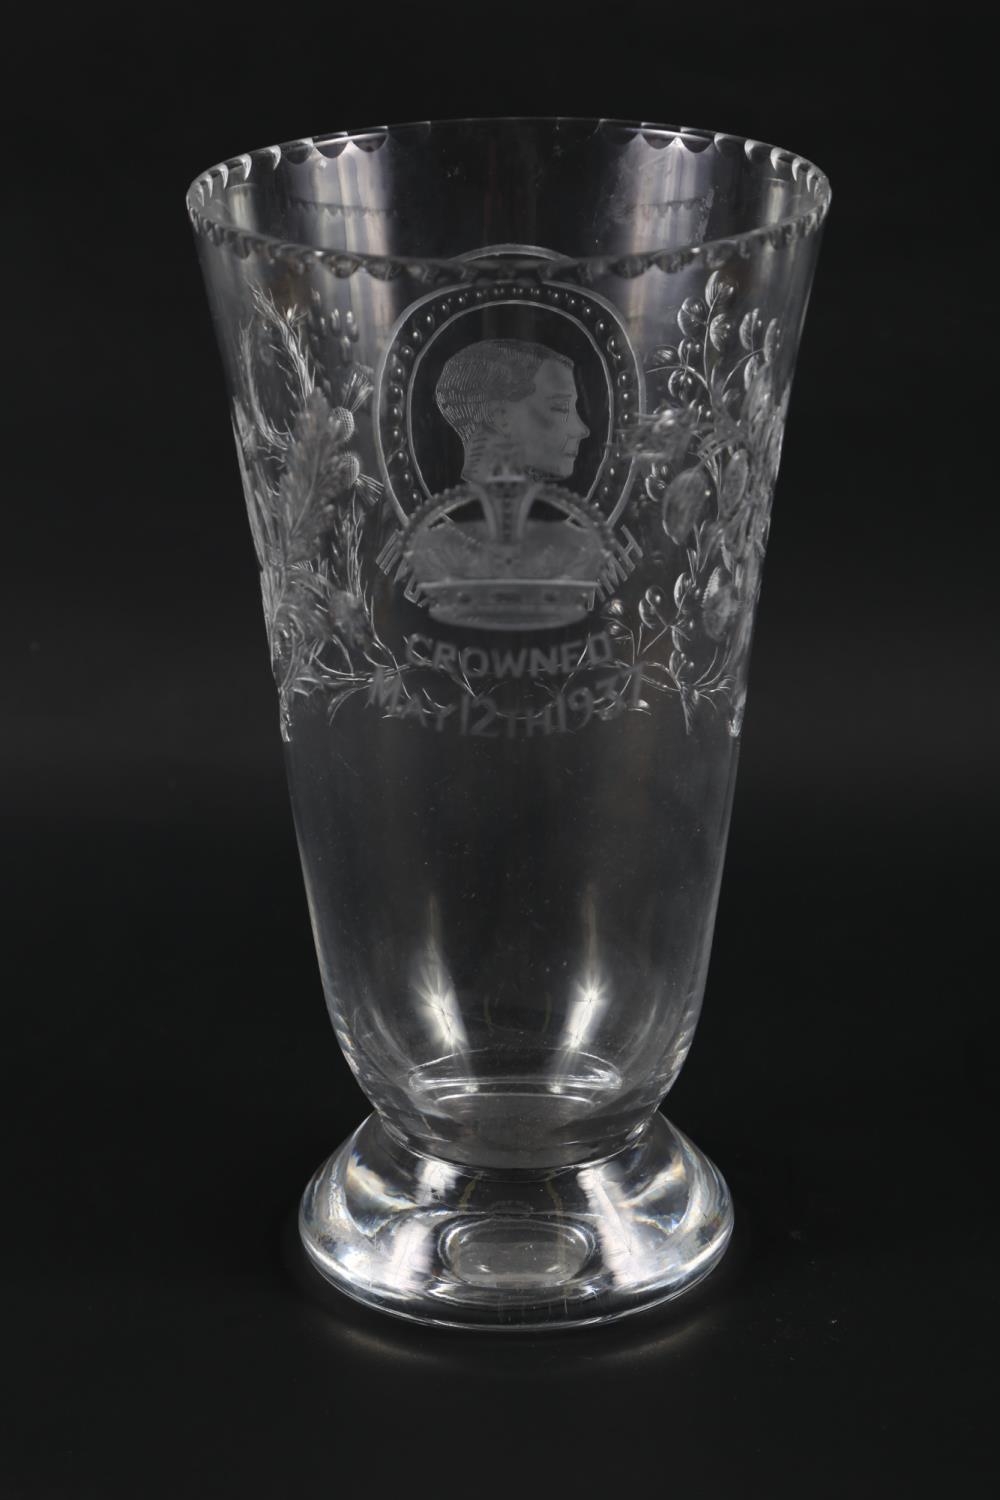 A Webb Edward VIII 1937 Coronation tapered glass vase with hand engraved decoration, 10 1/2" high - Image 4 of 6